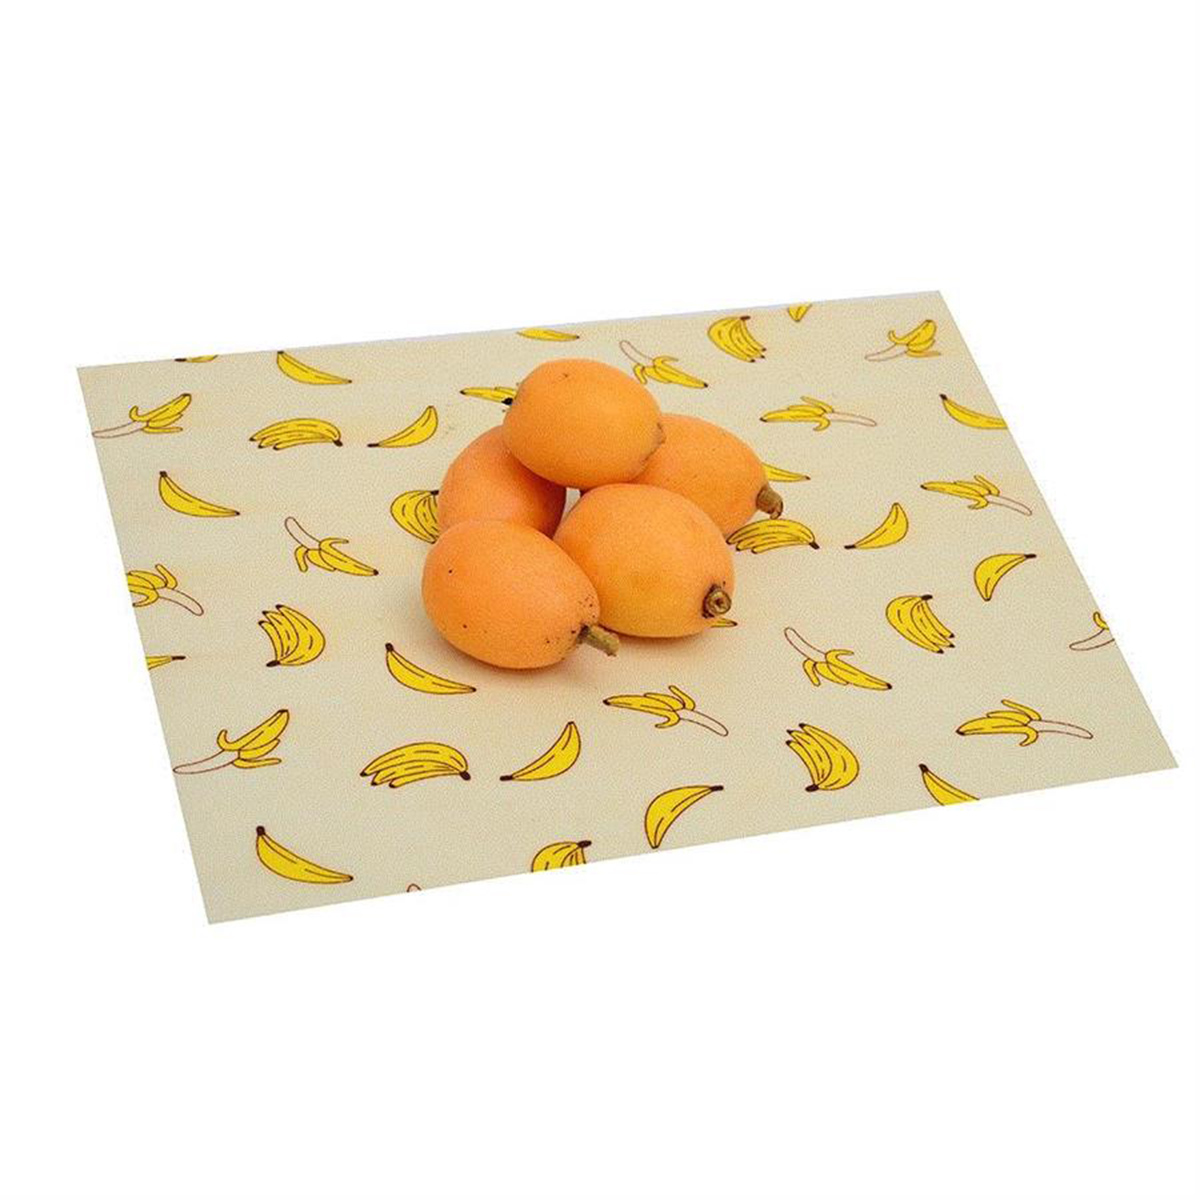 Safety-Beeswax-Food-Wrap-Fresh-Keeping-Reusable-Paper-Seal-Storage-Cover-1583302-6